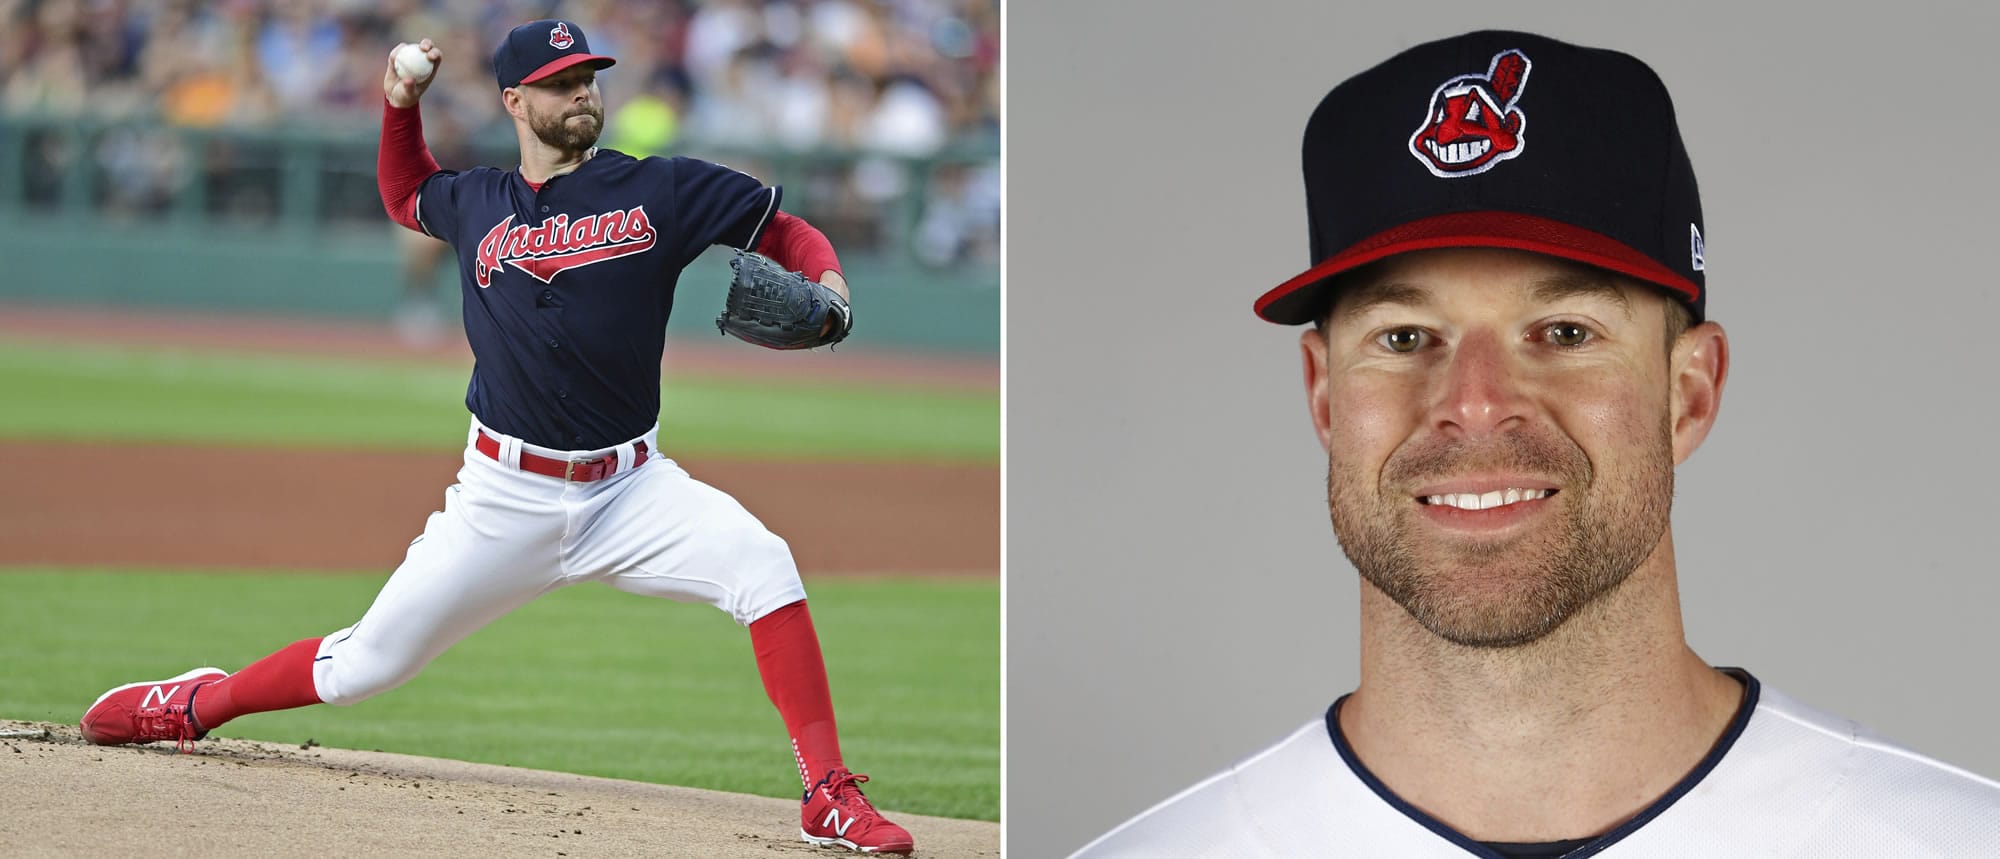 Cleveland Indians pitcher Corey Kluber earned his second AL Cy Young Award, being named the 2017 winner on Wednesday, No. 15, 2017.